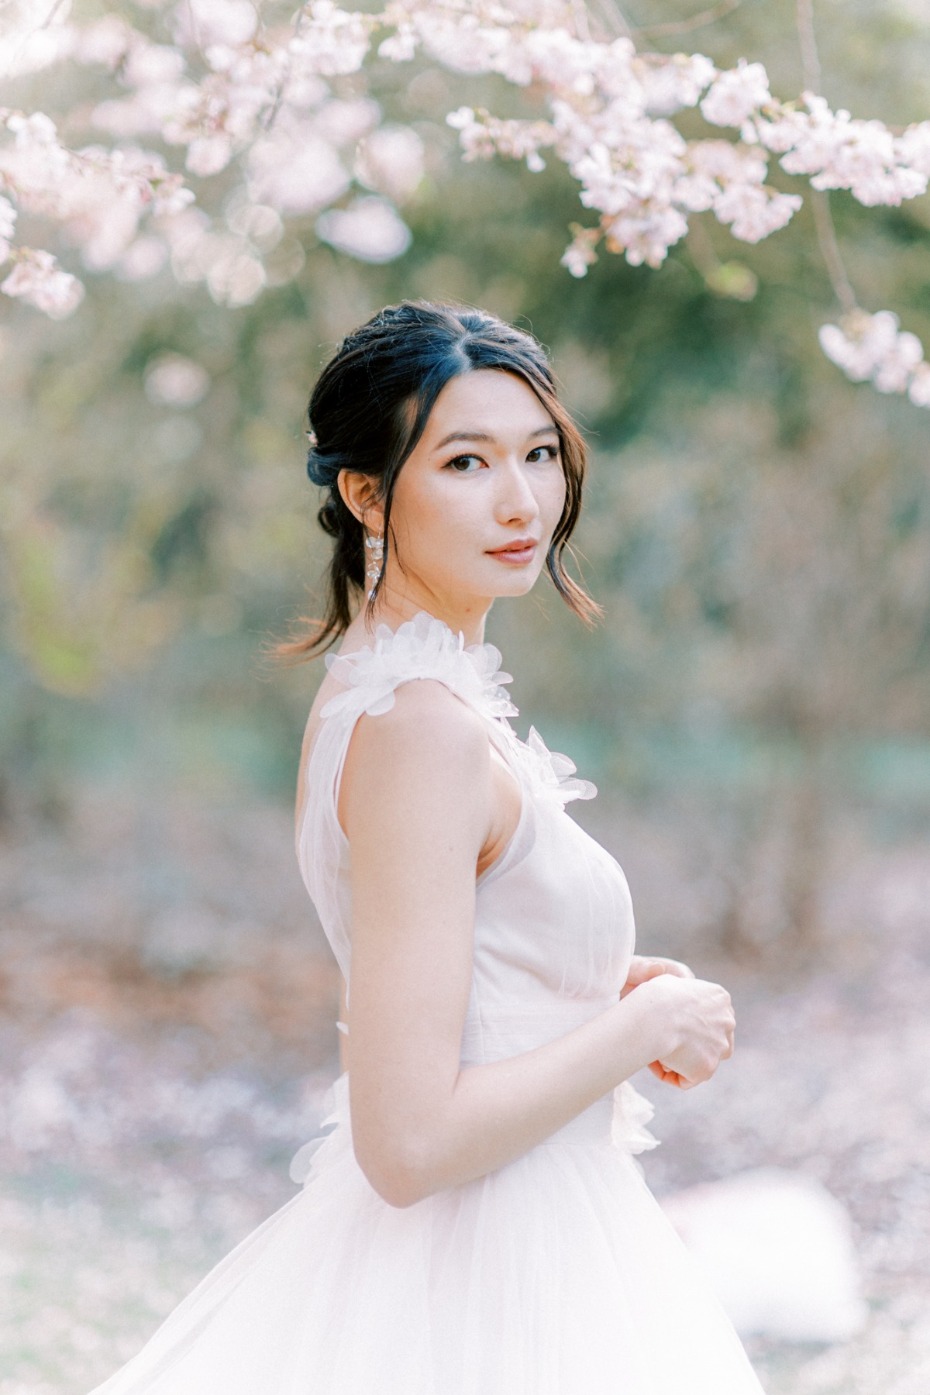 Classic Wedding Hair and Makeup Looks We're Loving